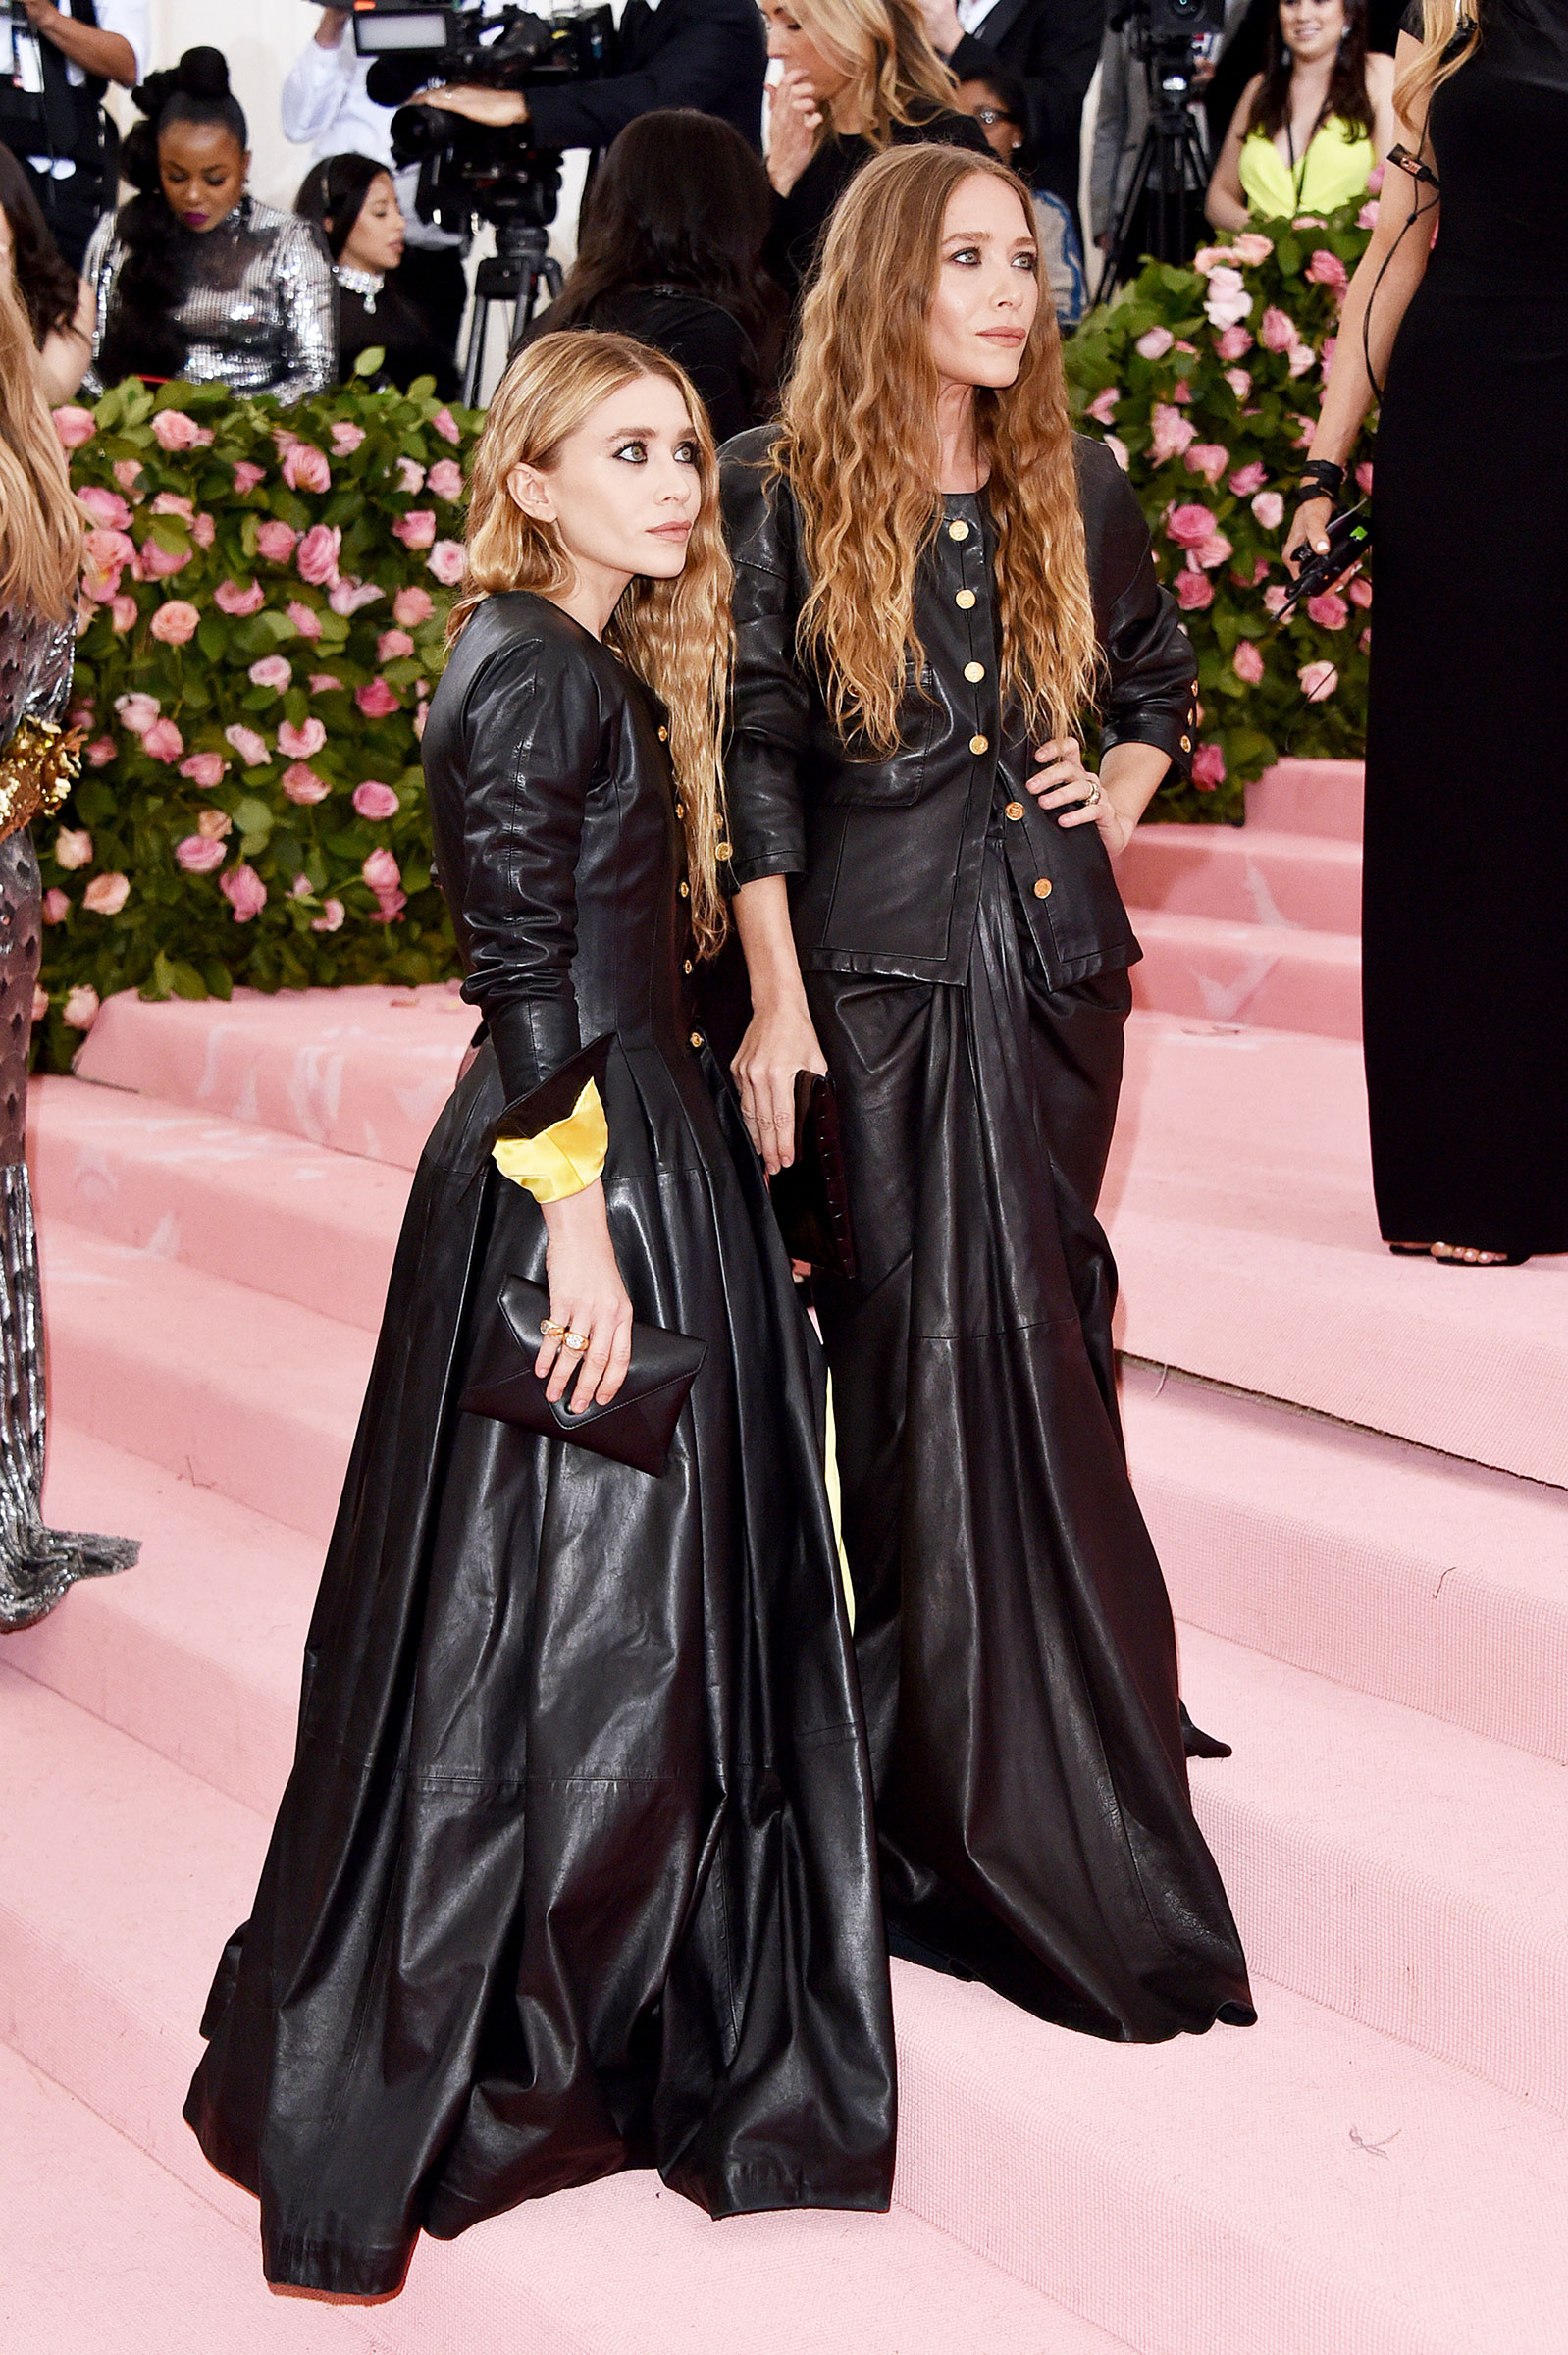 Mary-Kate Olsen and Ashley Olsen attend The 2019 Met Gala Celebrating Camp